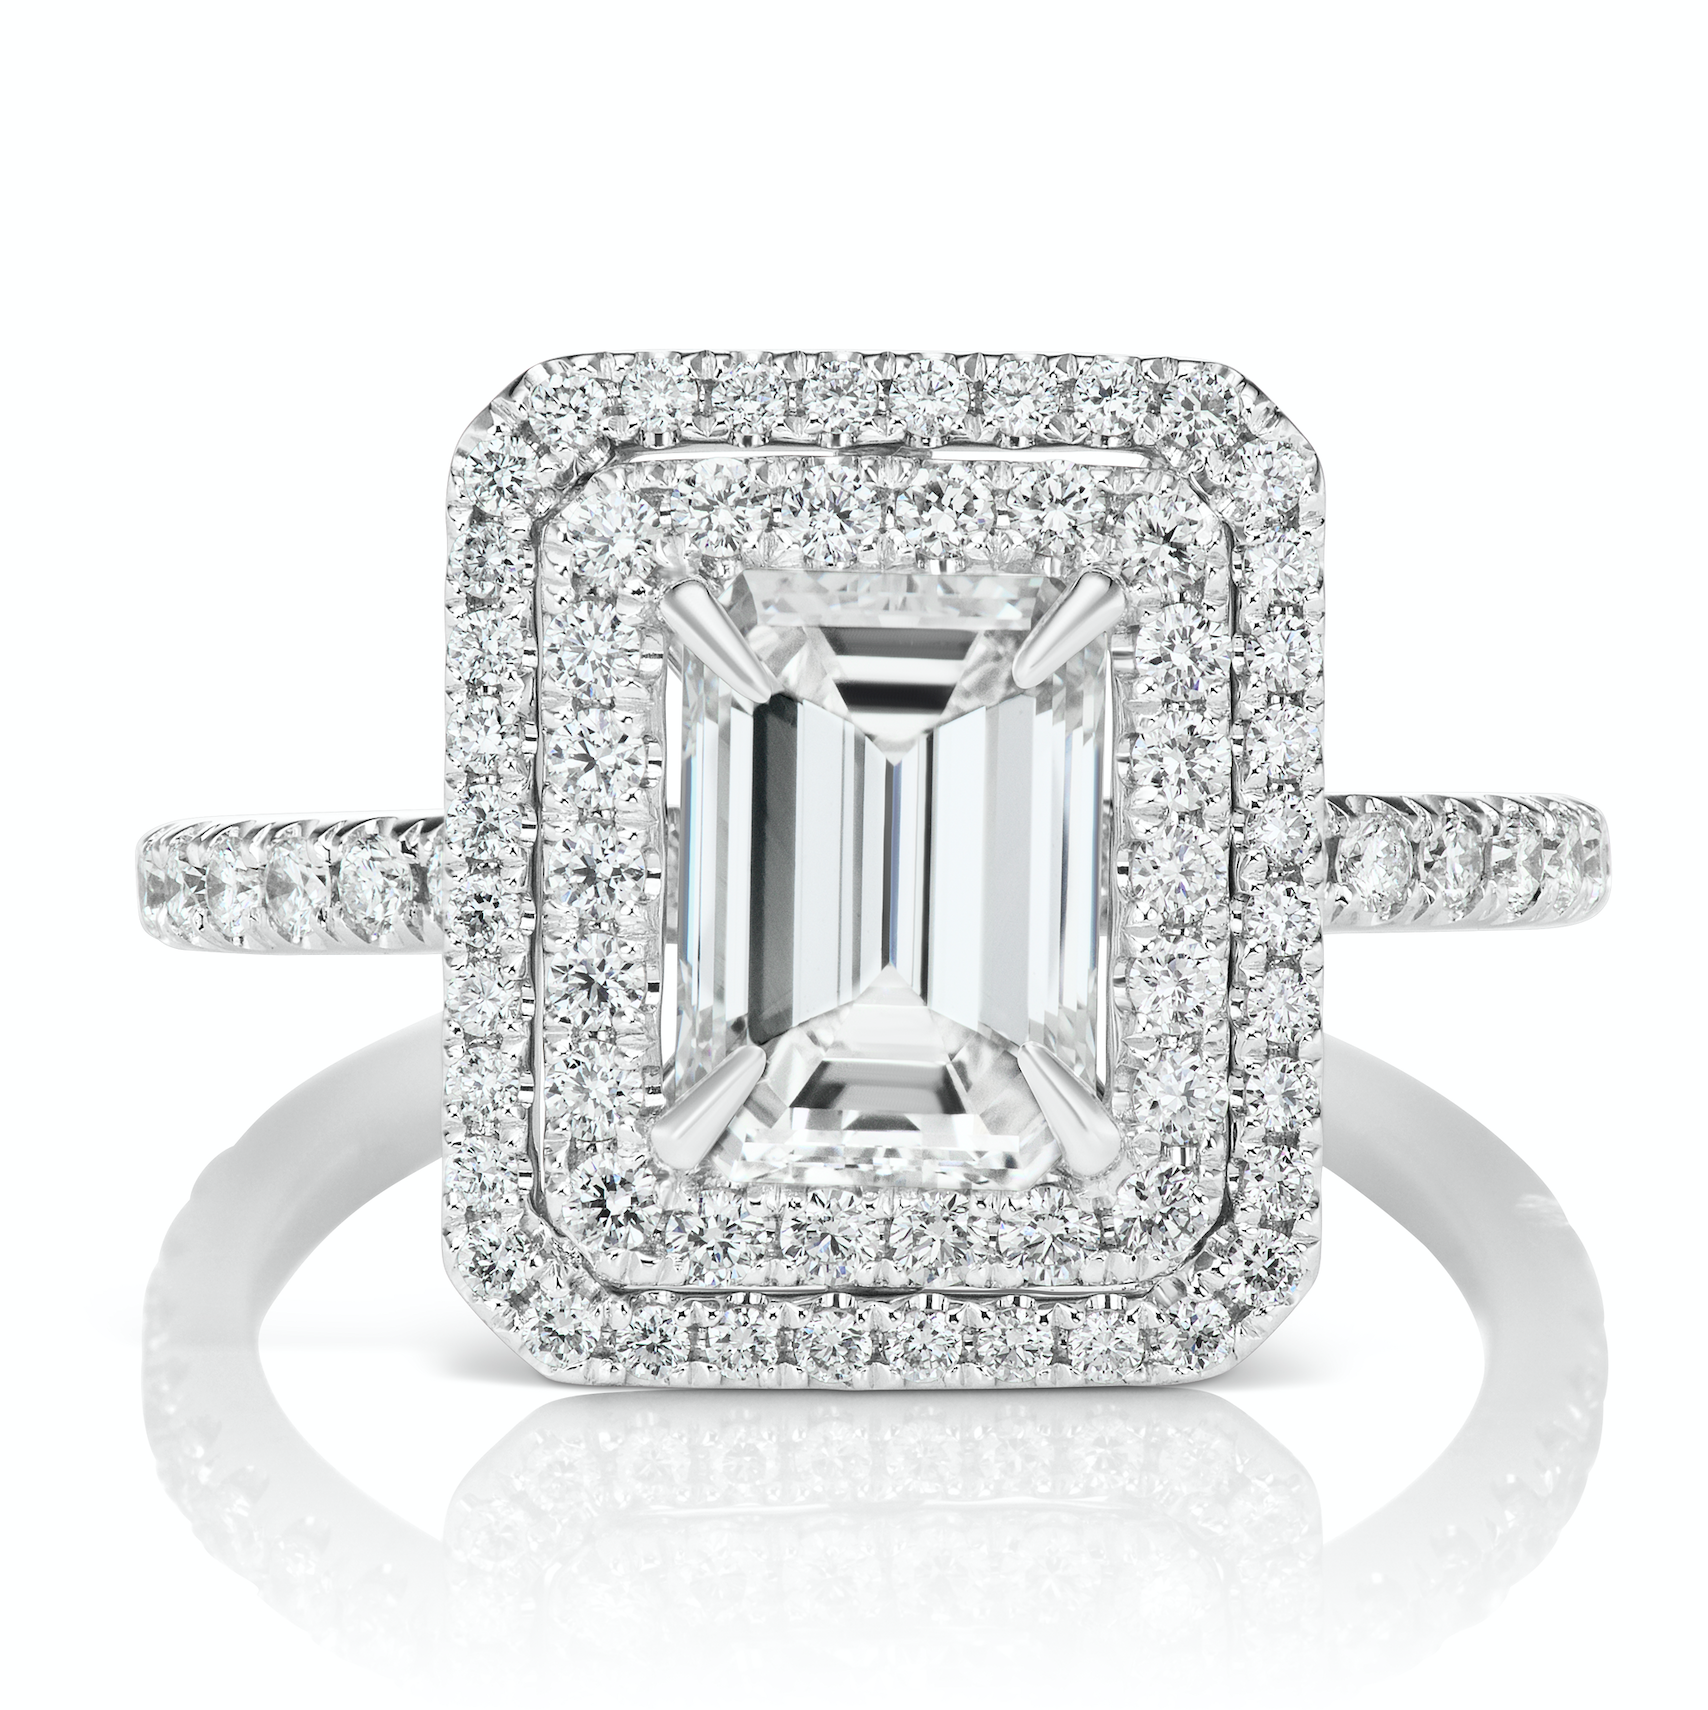 Diamond Ring Emerald Cut 3 Carat Halo Ring in 18K White Gold Front View